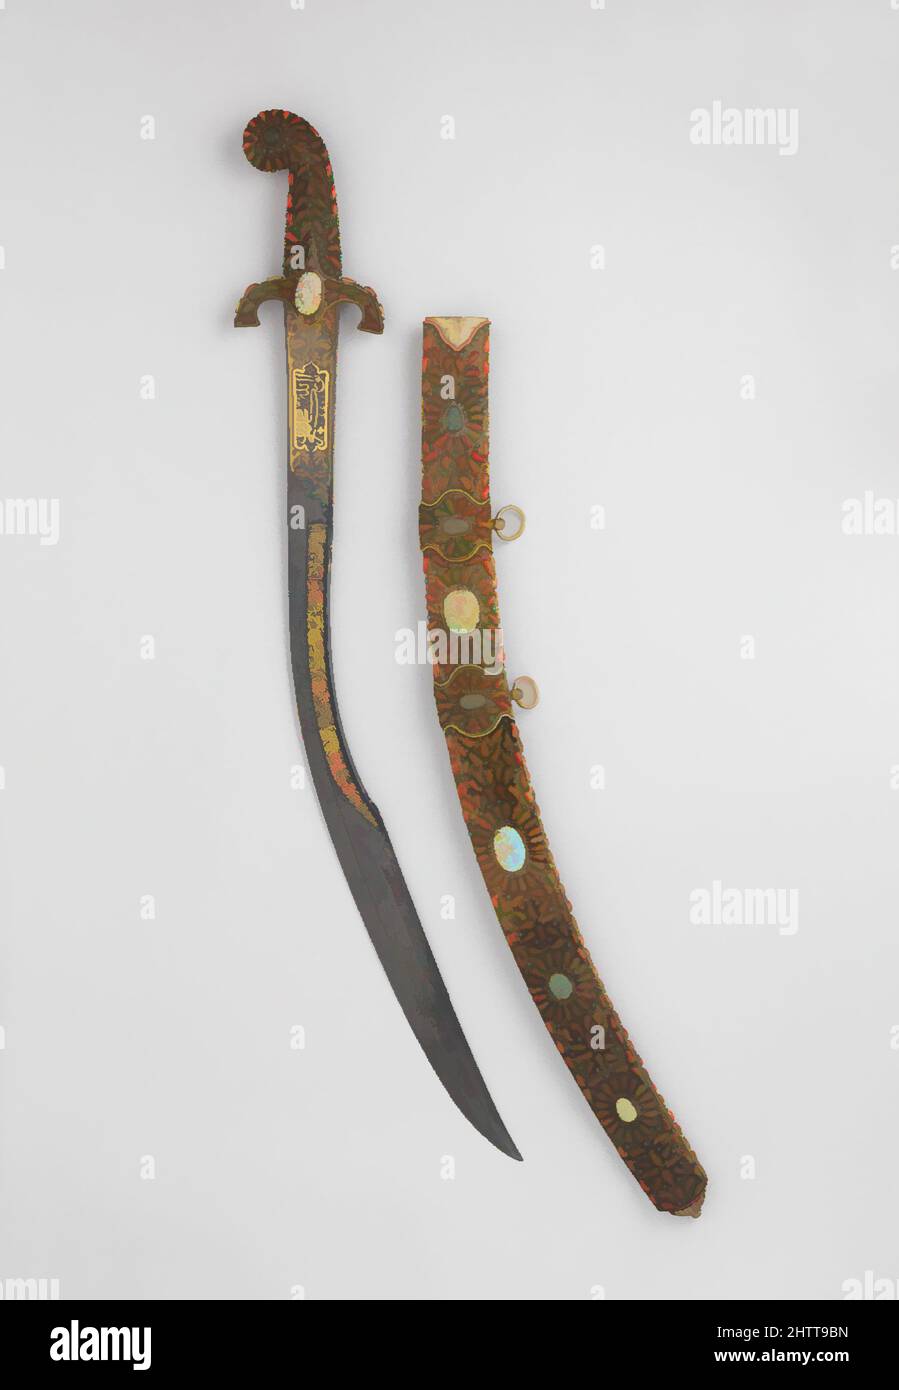 Art inspired by Sword (Kilij) with Scabbard, 19th century, Turkish, Steel, wood, turquoise, coral, emerald, gold, L. 35 1/2 in. (90.2 cm), Swords, The inscriptions on the sword invoke Allah, the Prophet Muhammad, and ‘Ali. The stones adorning the hilt and scabbard of the sword have, Classic works modernized by Artotop with a splash of modernity. Shapes, color and value, eye-catching visual impact on art. Emotions through freedom of artworks in a contemporary way. A timeless message pursuing a wildly creative new direction. Artists turning to the digital medium and creating the Artotop NFT Stock Photo